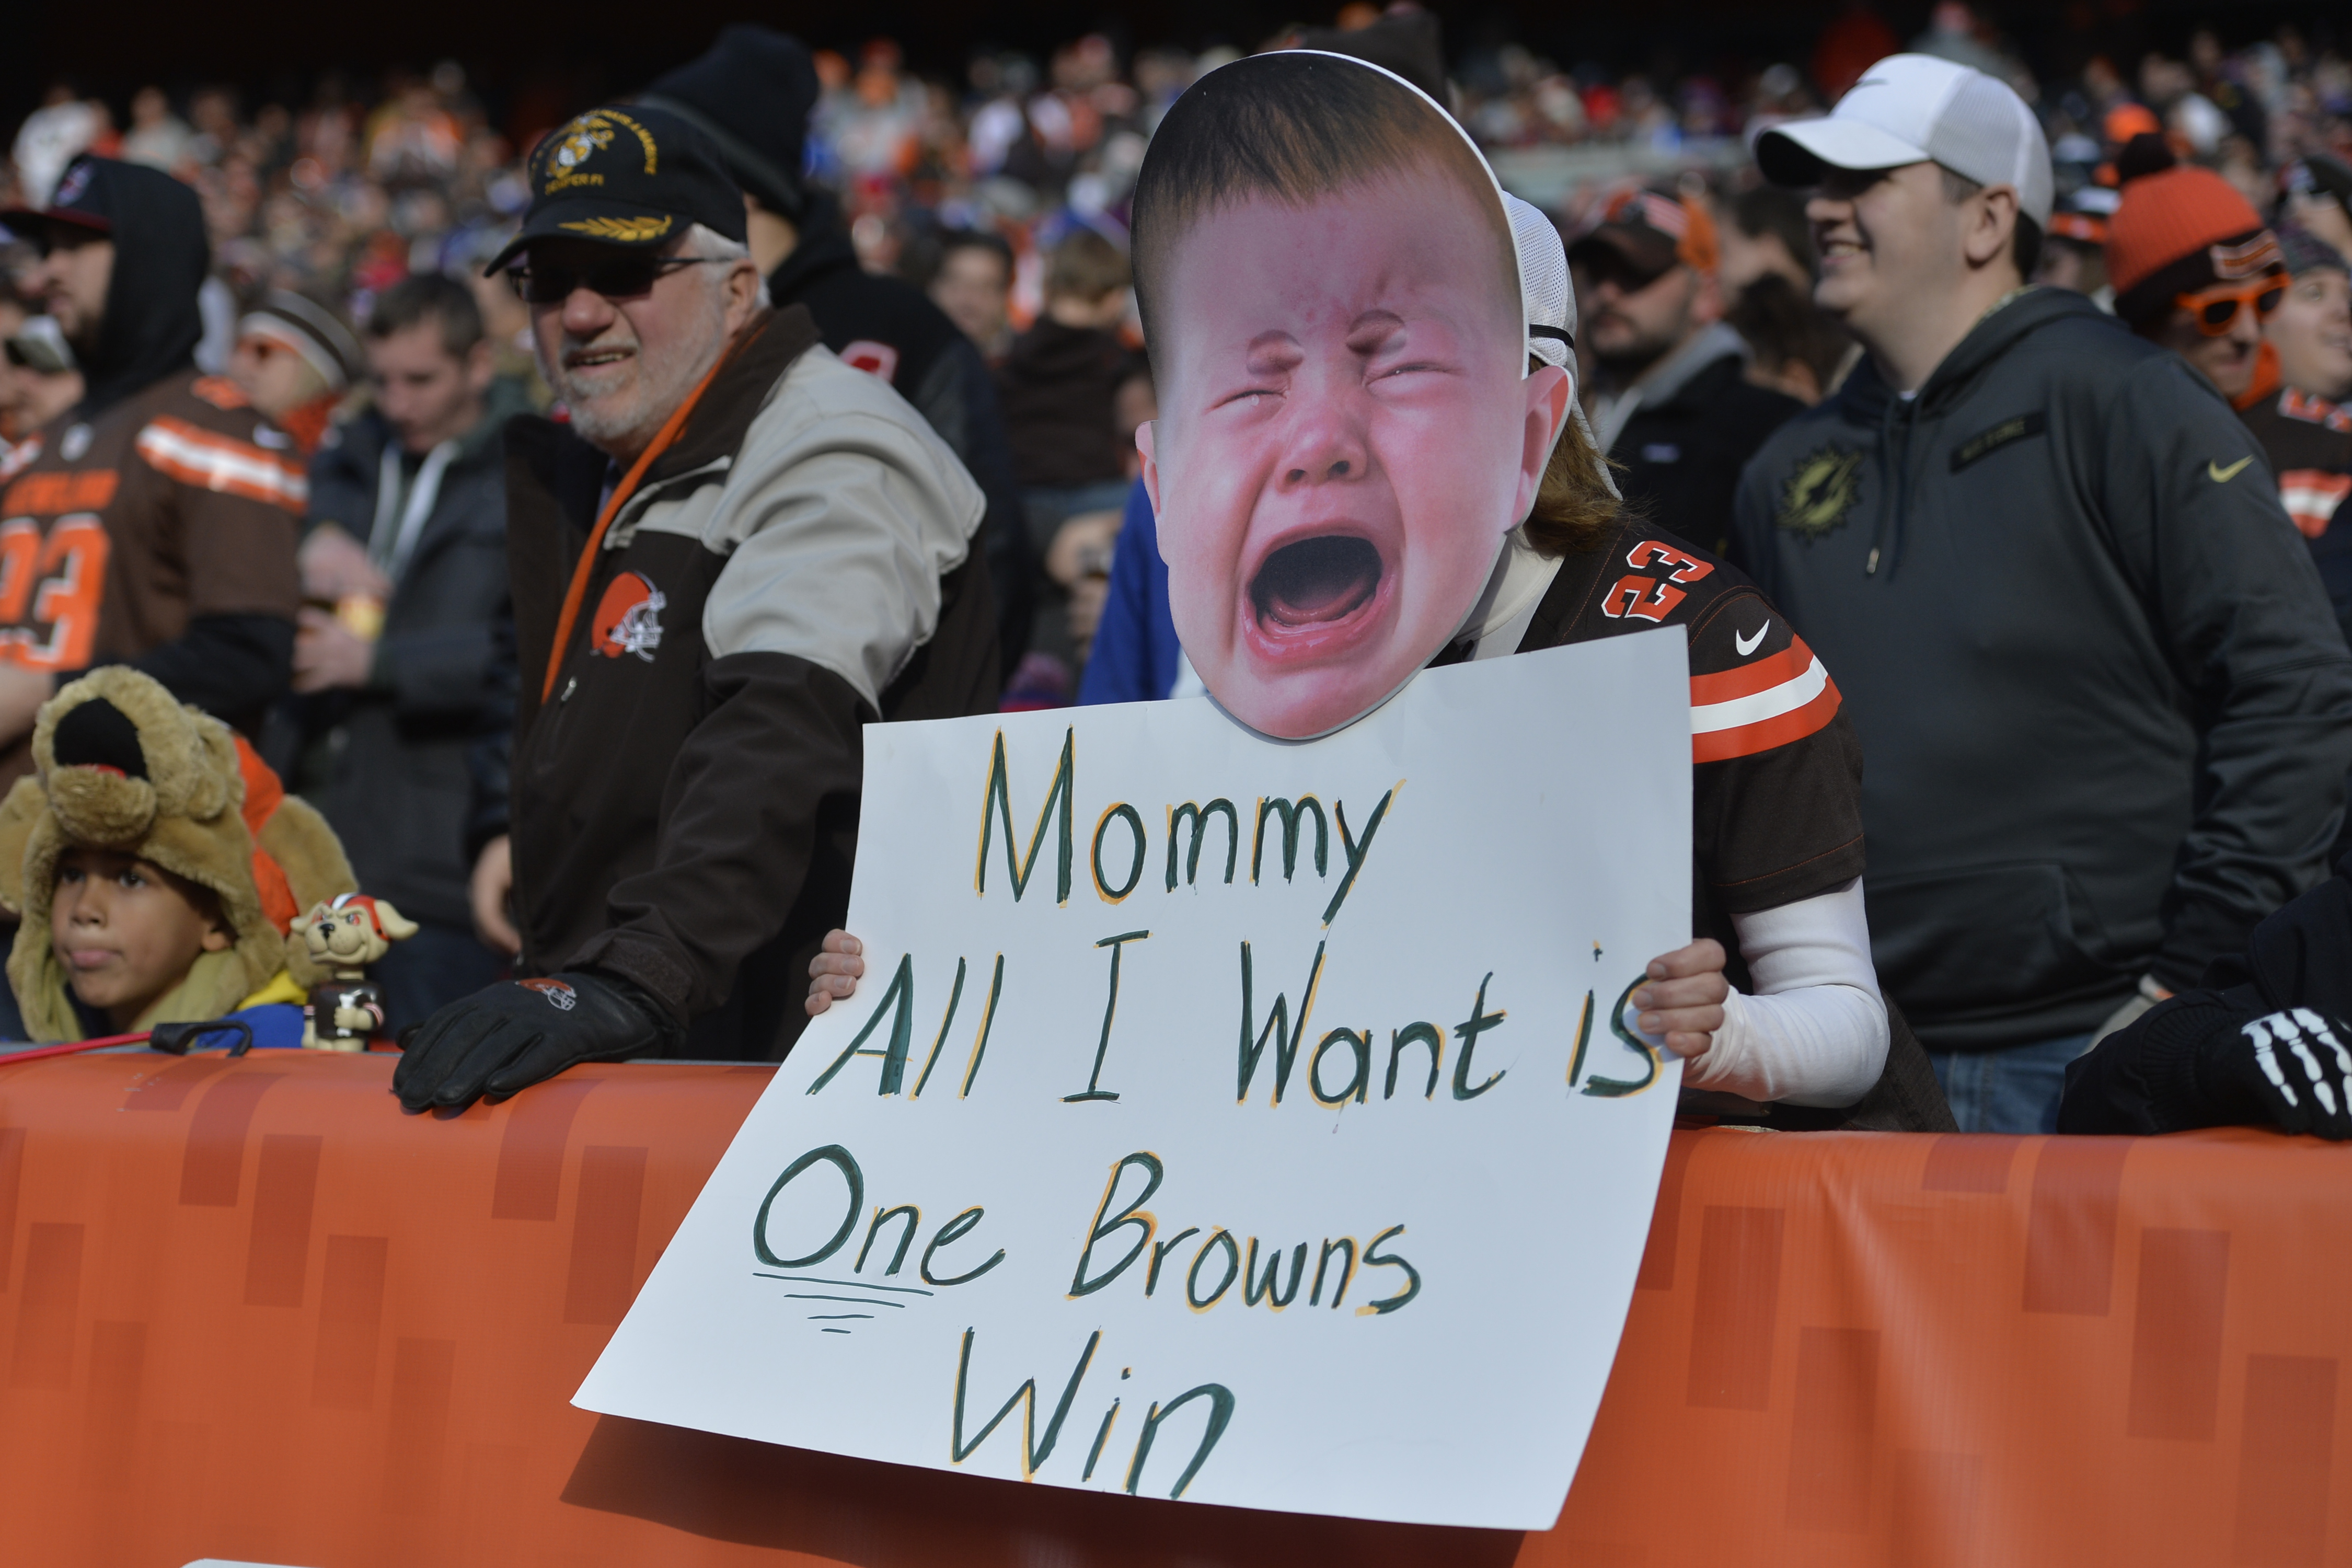 A fan holds a sign referring to the Cleveland Browns' winless season during an NFL football game between the Browns and the New York Giants, Sunday, Nov. 27, 2016, in Cleveland. AP Photo | David Richard.